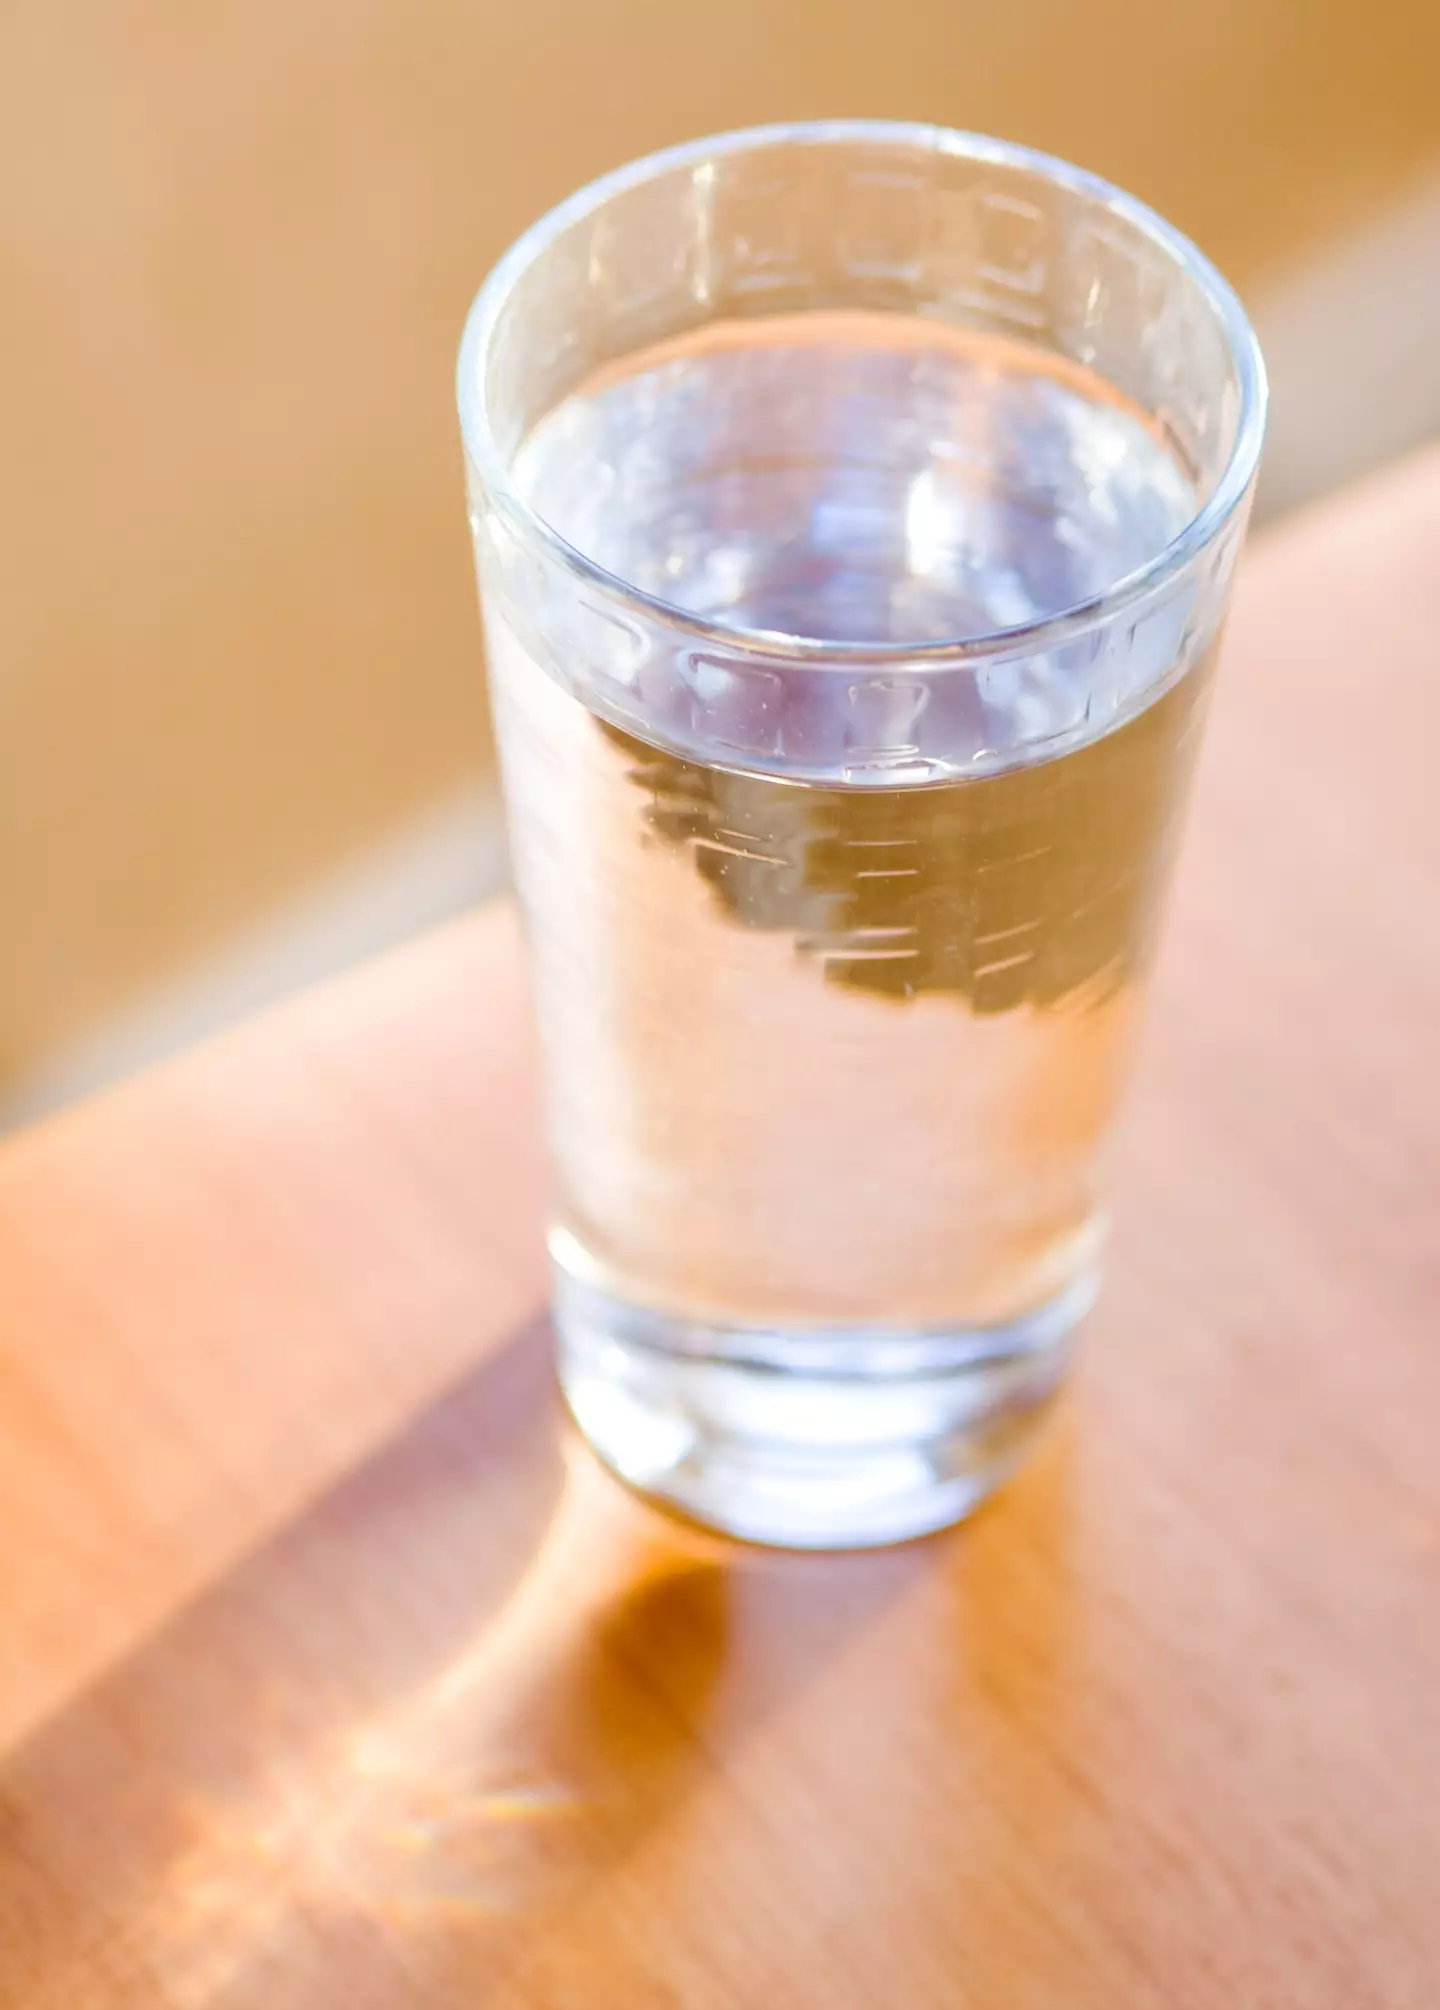 Those with a high turnover often drink - and require - more water.